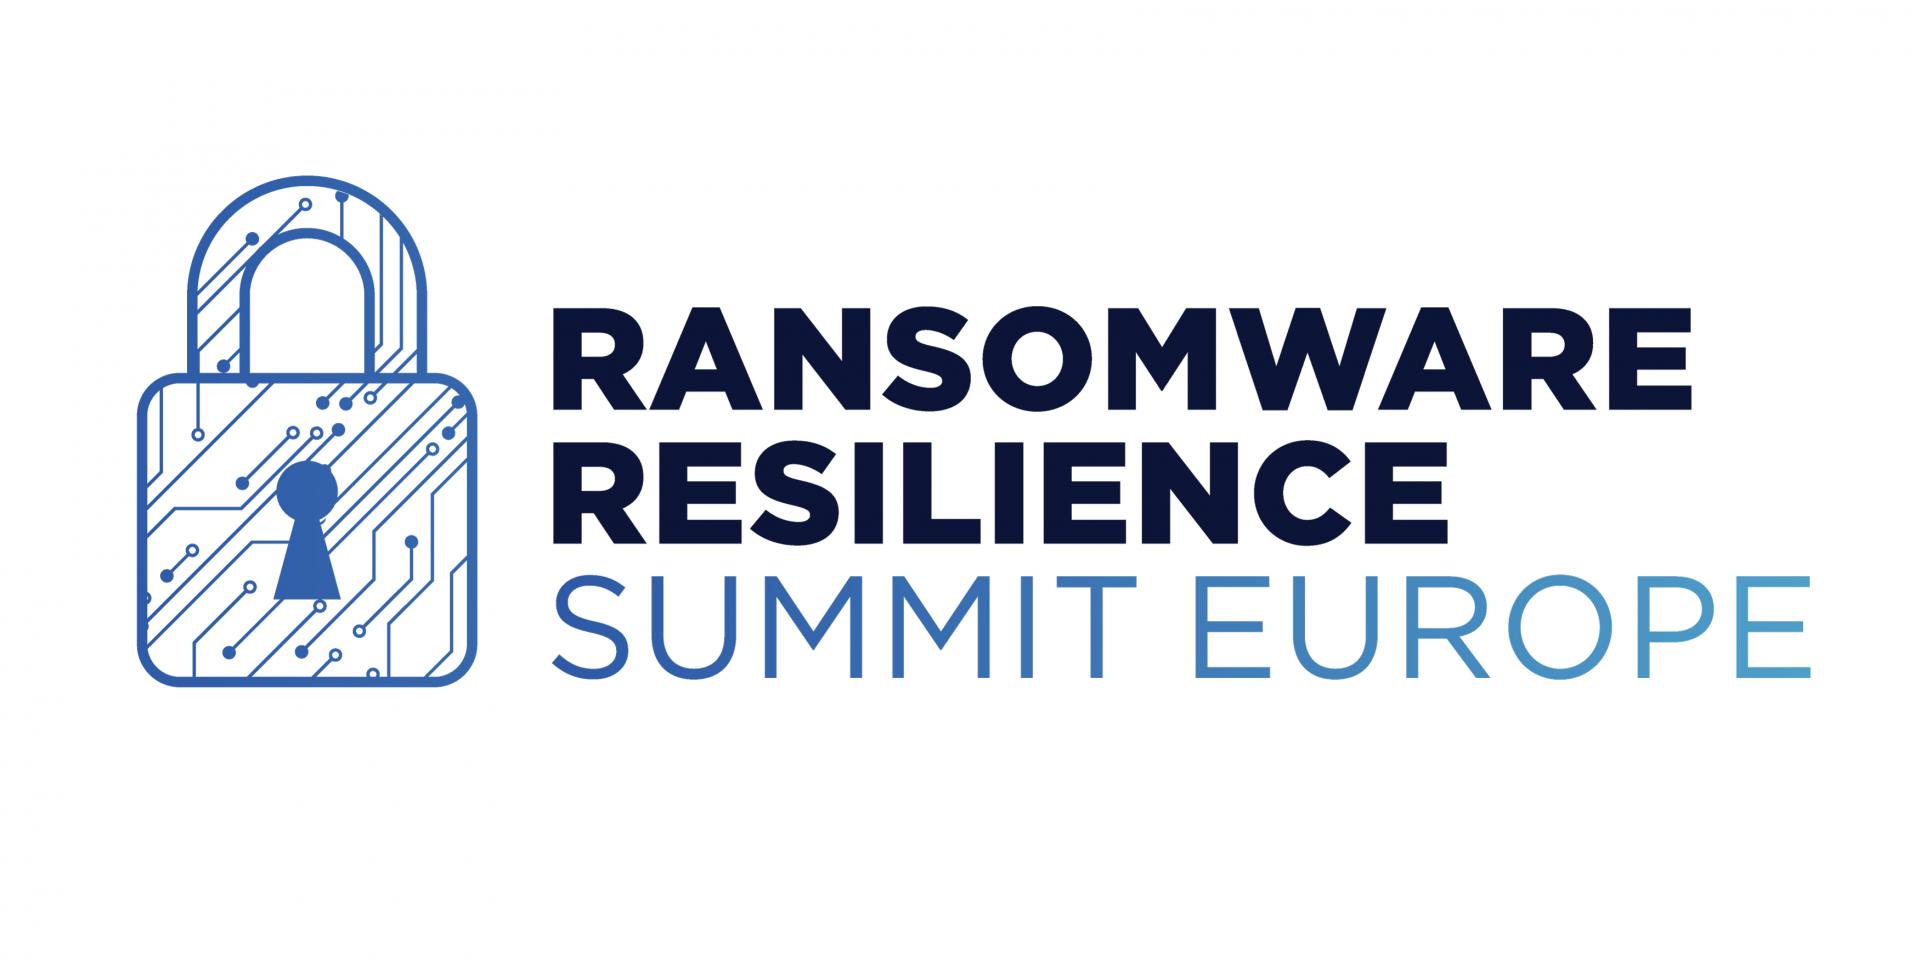 Ransomware Resilience Summit Europe